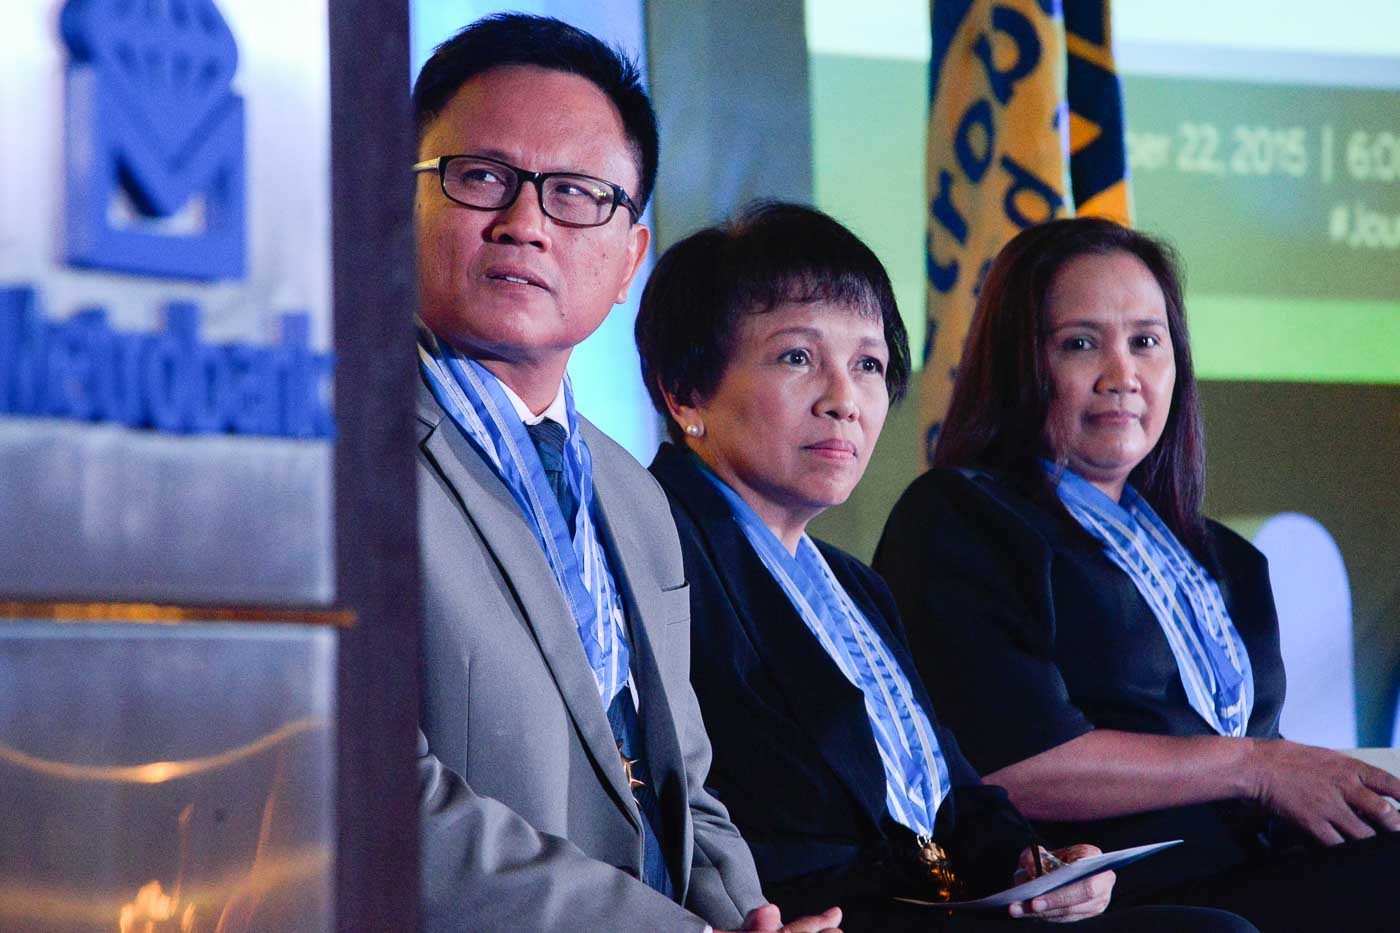 For Metrobank’s Journalists of the Year, social change is incremental